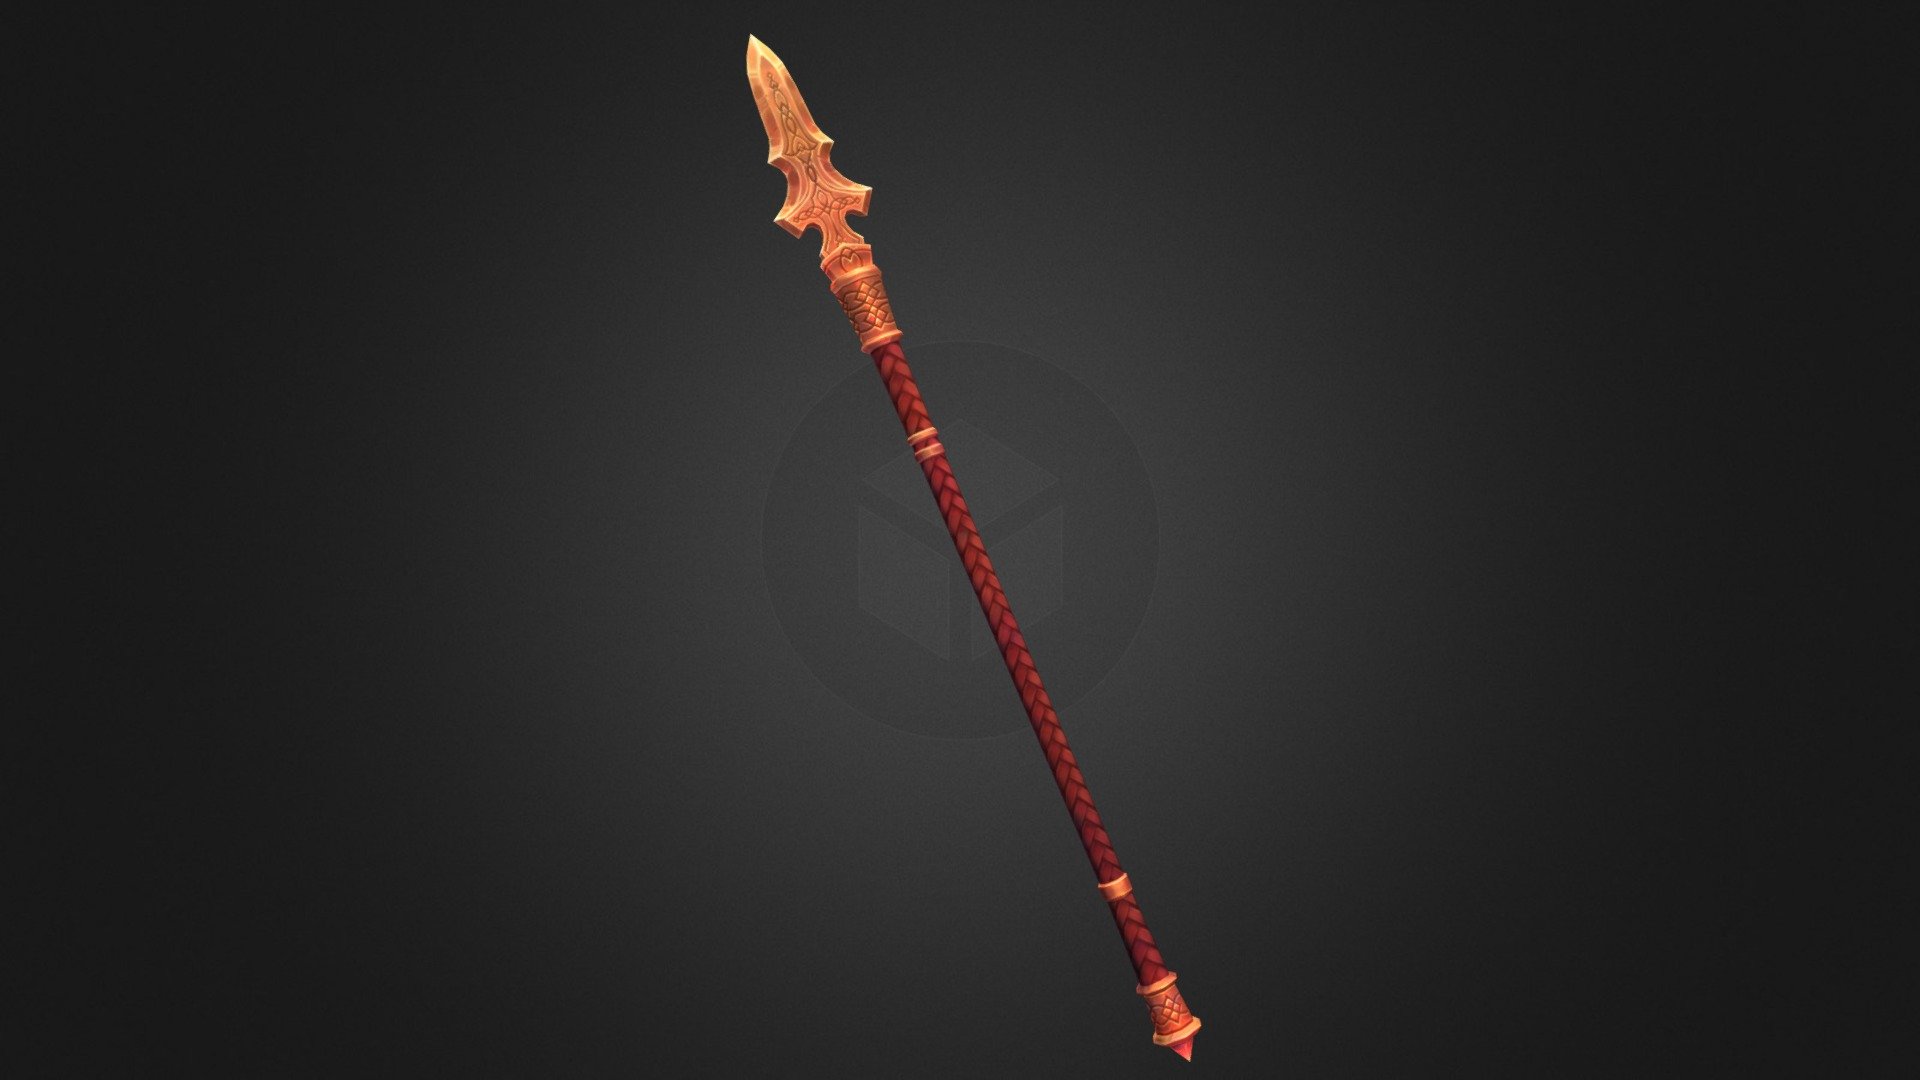 Part of a personal project. I wanted to create a simple but regal looking spear in the WoW hand-painted style for a D&amp;D character of mine.

Check out more of my work at www.AlexandraQuinby.com and www.artstation.com/aquinby !

I'm also on Twitter and Instagram as AlexQuinbyArt! - Golden Spear - 3D model by Alexandra Quinby (@amquinby) 3d model